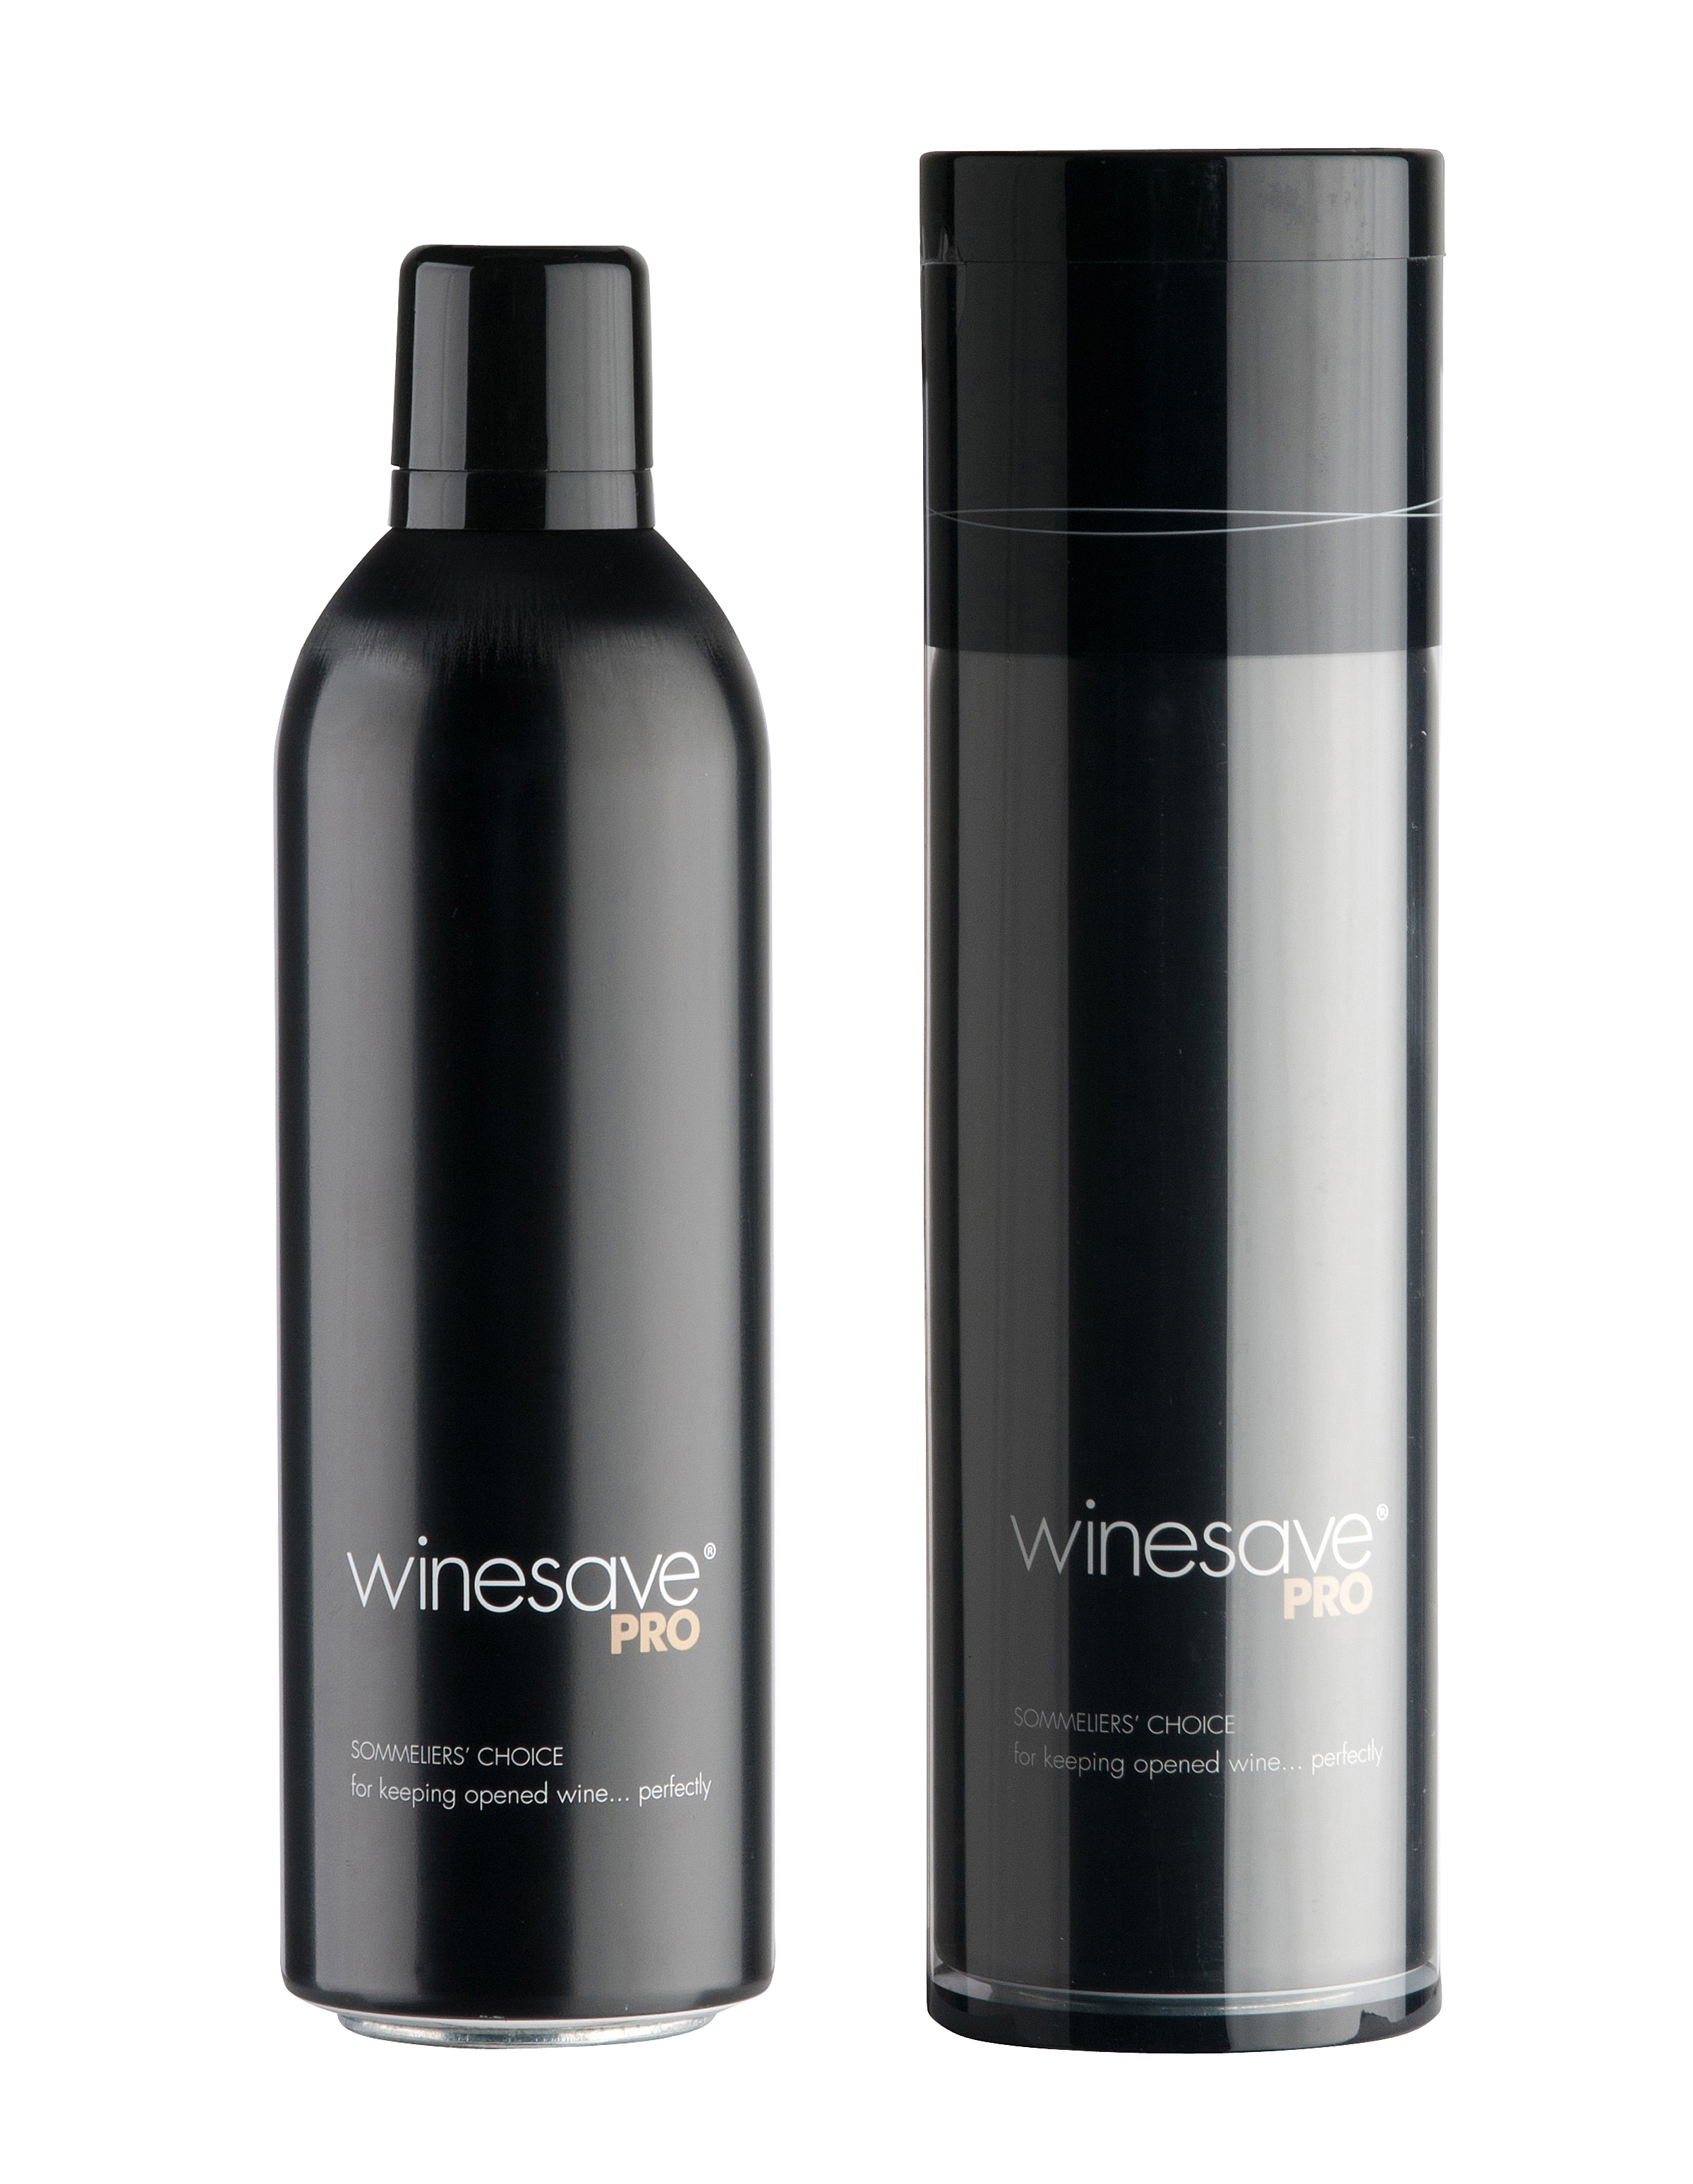 /globalassets/03-vintec/product-content/product-image/spiegelau/winesave-pro-w-packaging-2399x3095.png